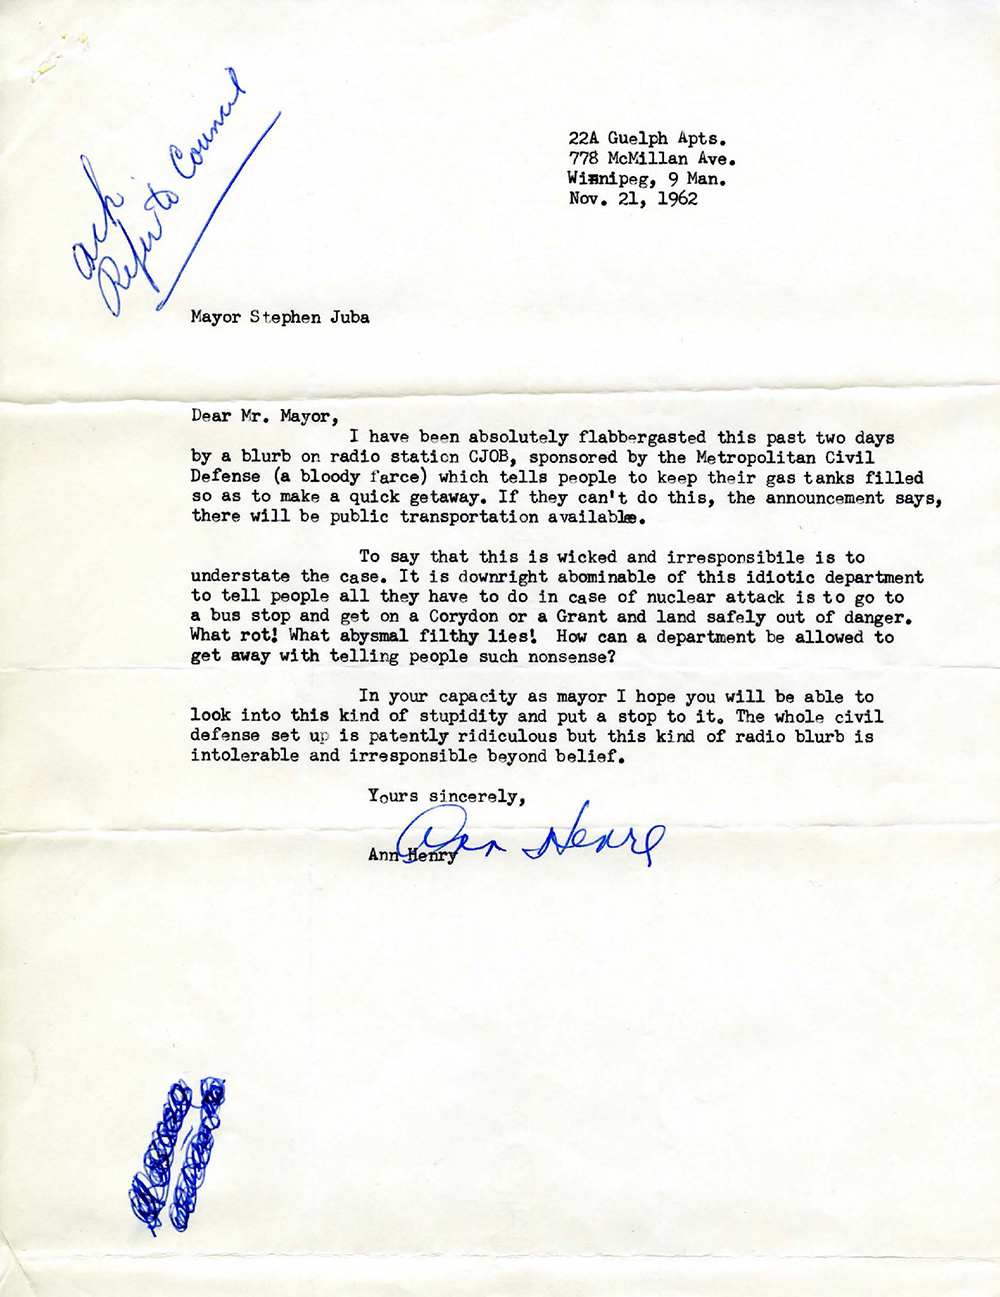 Letter from Ann Henry received as information by City Council, 1962. City of Winnipeg Archives, Council Communications, No. 22852.